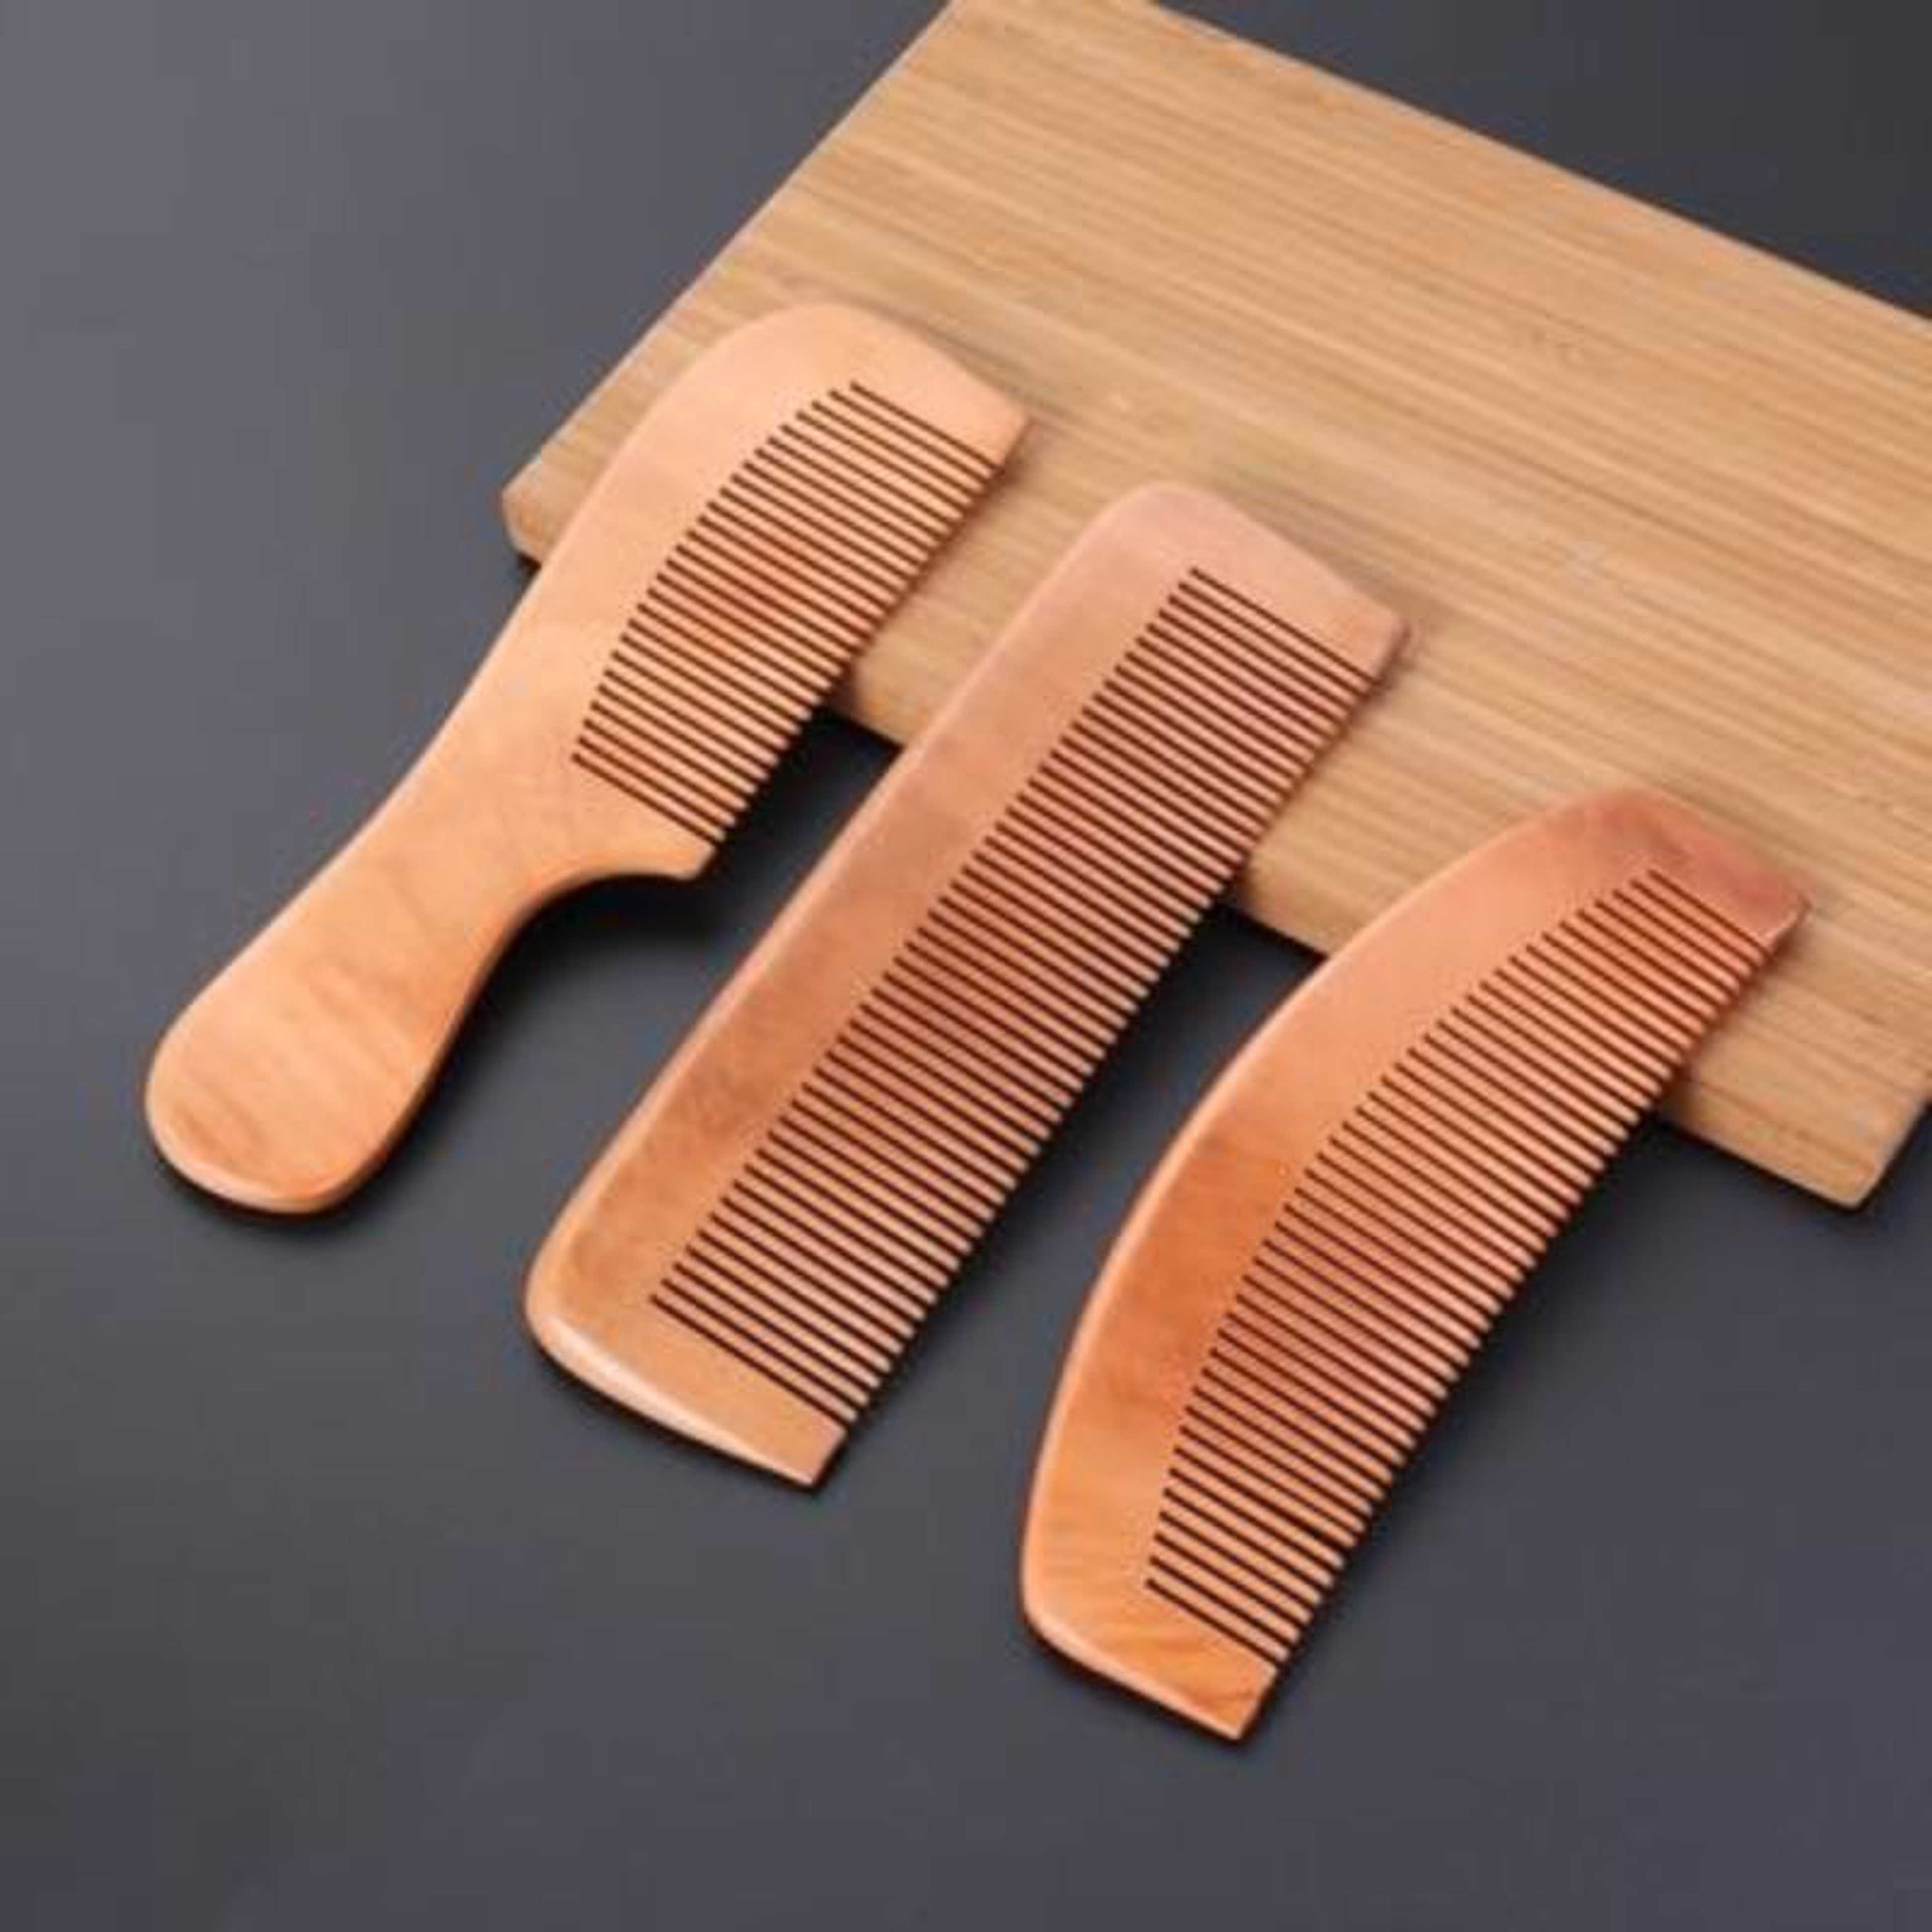 Wooden Comb for Curly Hair Anti Static Anti Frizz